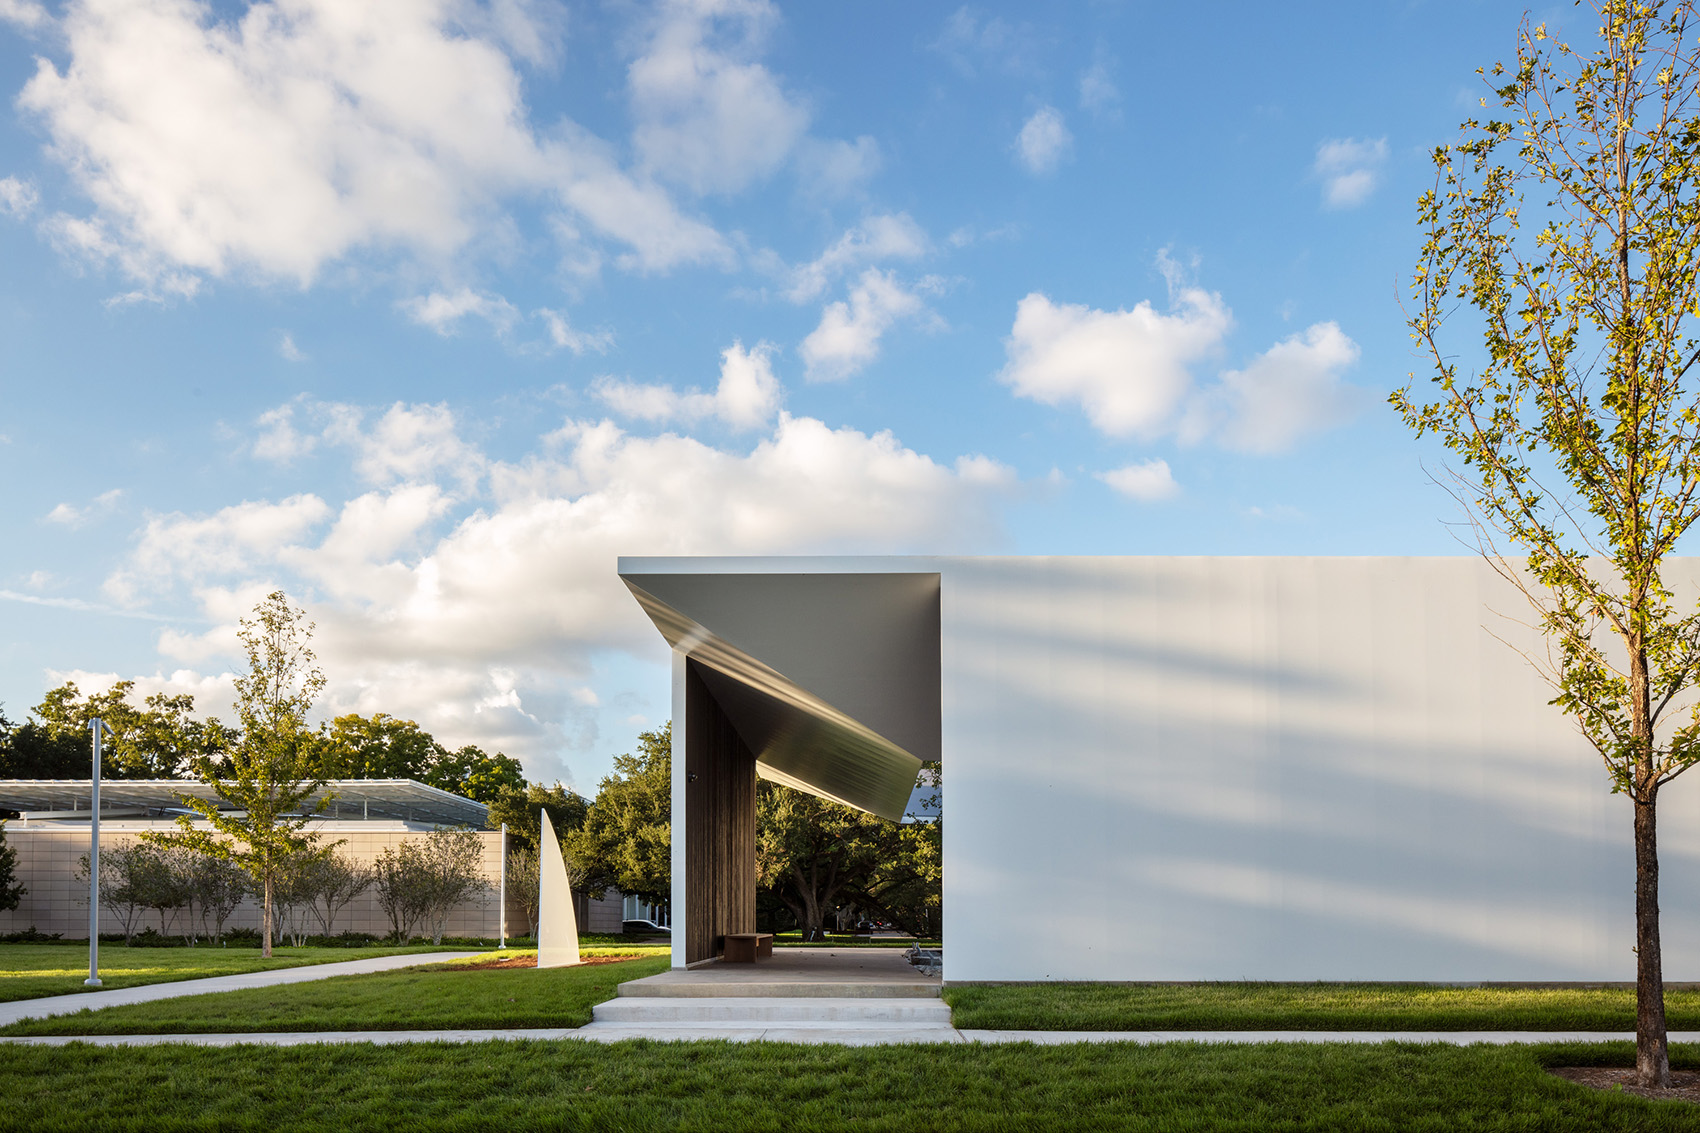 016 Menil Drawing Institute By Johnston Marklee 